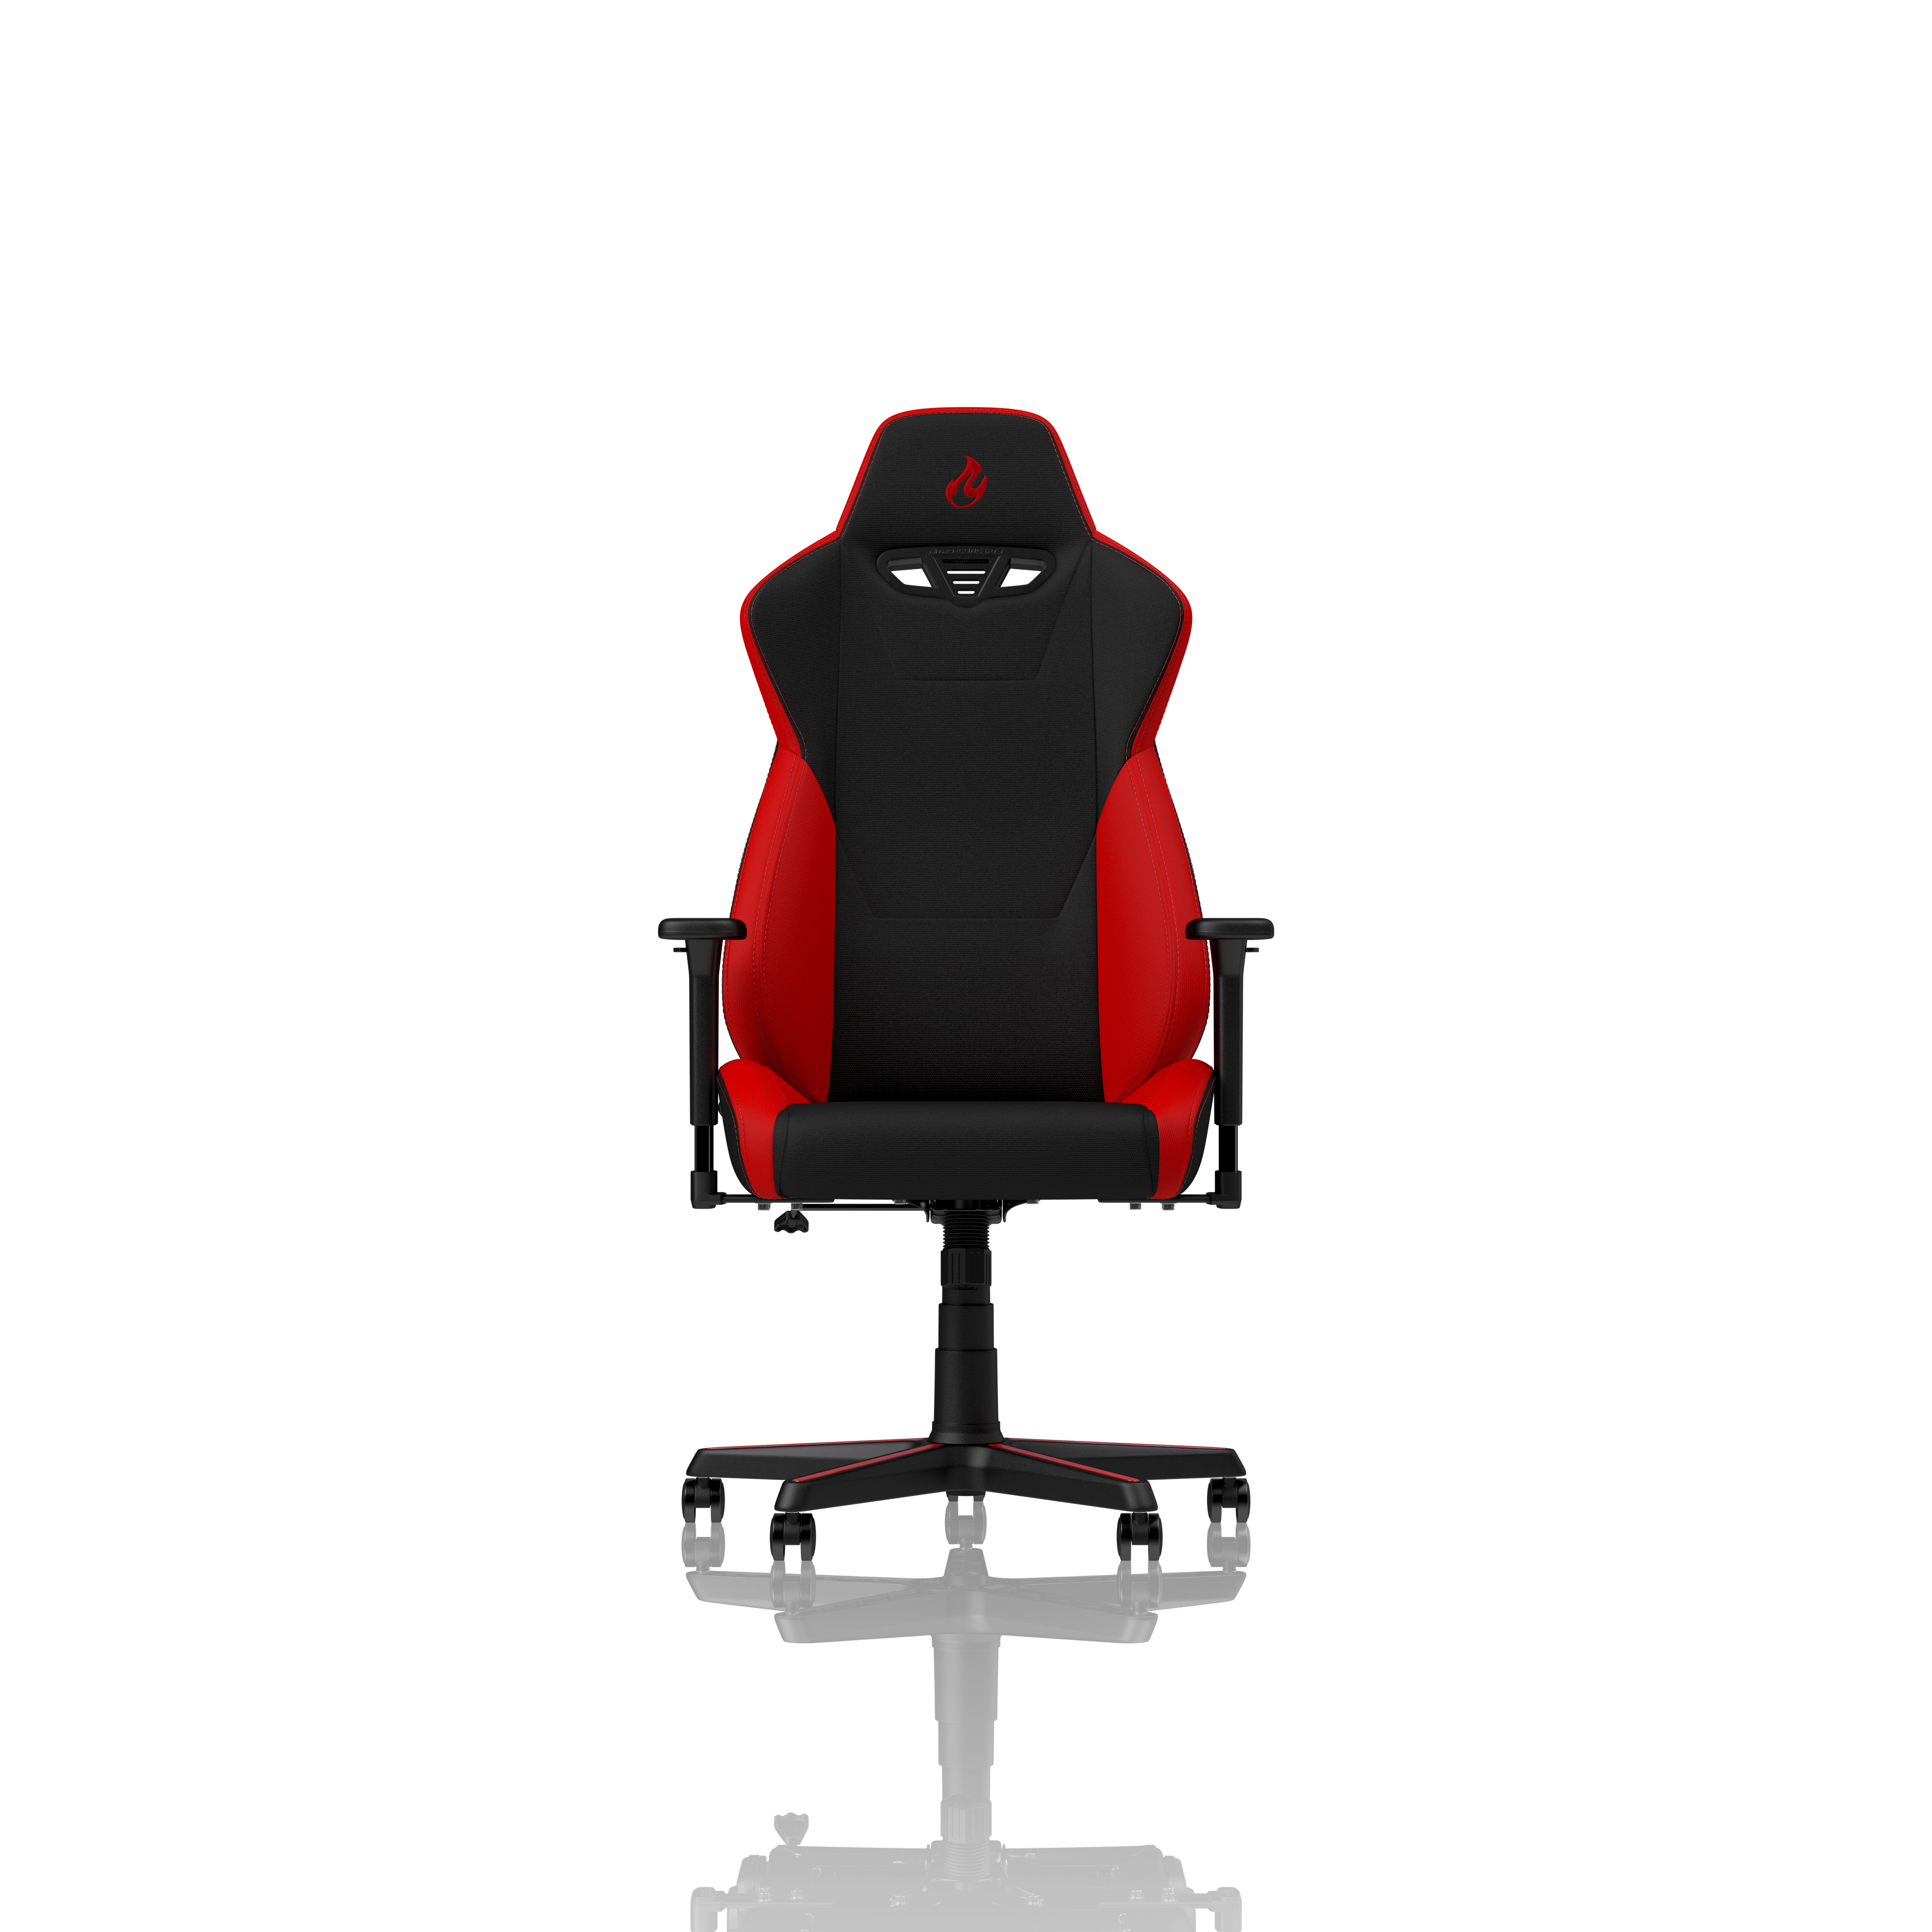 nitro-concepts - Fauteuil gaming S300 Inferno Red